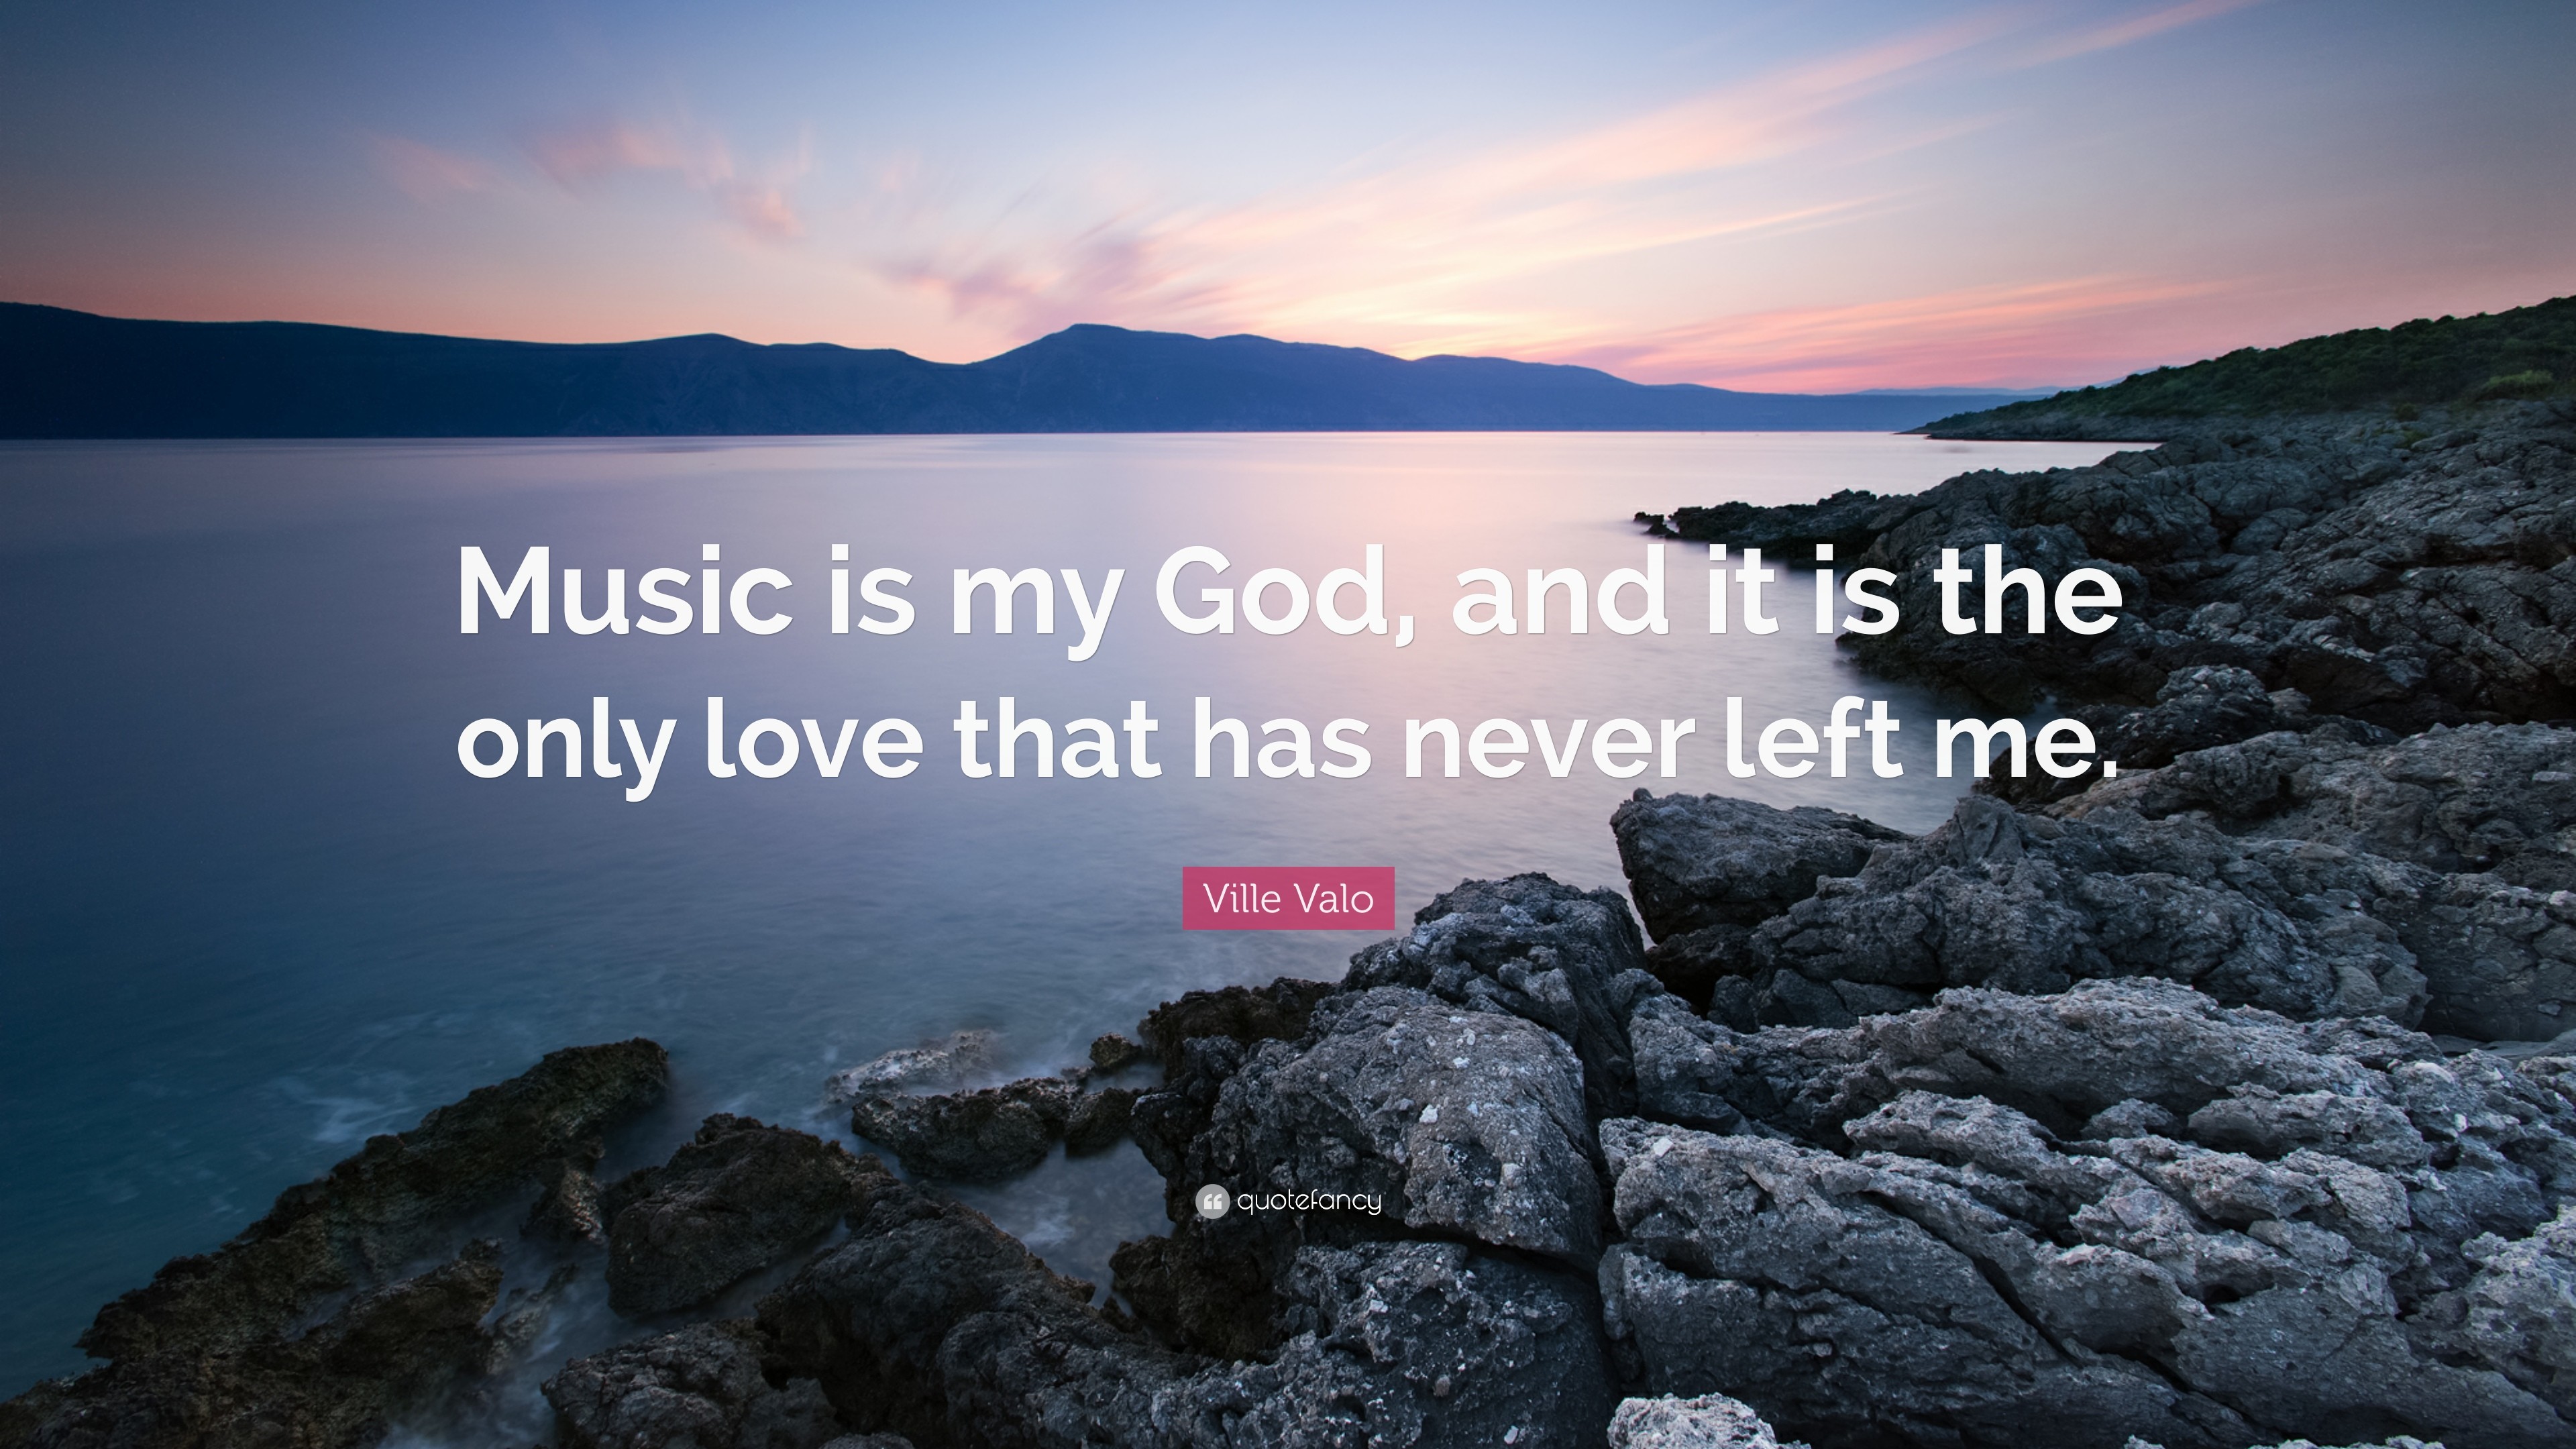 3840x2160 Ville Valo Quote: “Music is my God, and it is the only love